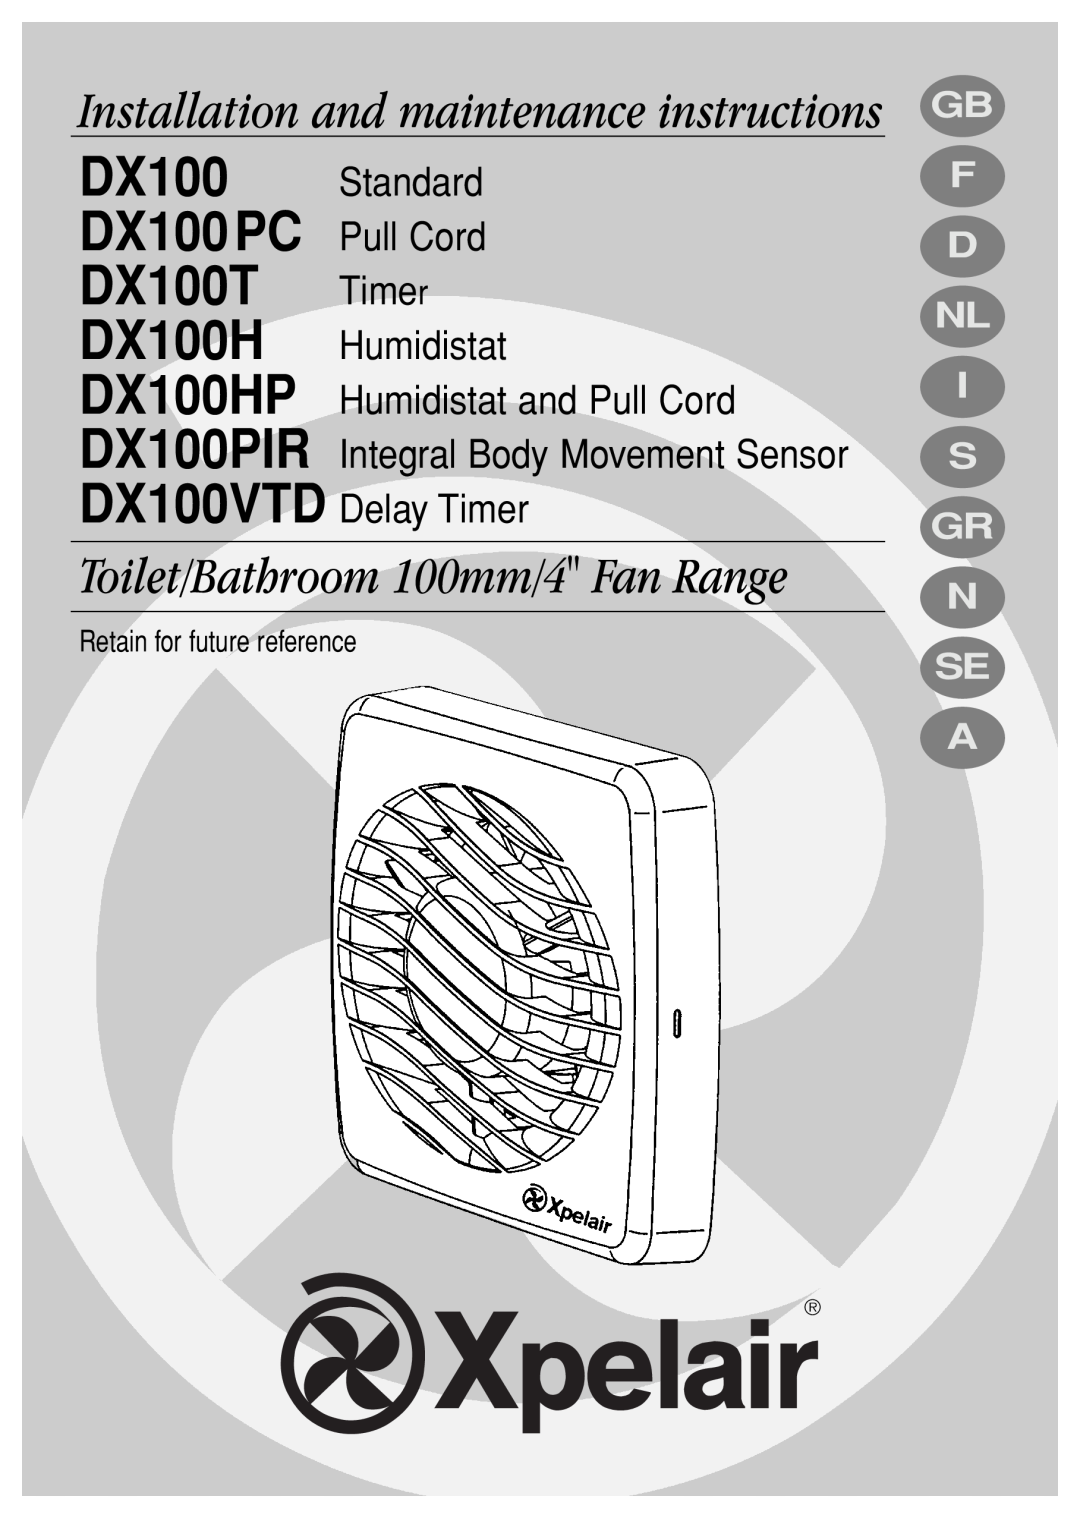 Xpelair manual Gb F D Nl I S Gr N Se A, Retain for future reference, DX100 PC Pull Cord DX100T Timer, DX100 Standard 